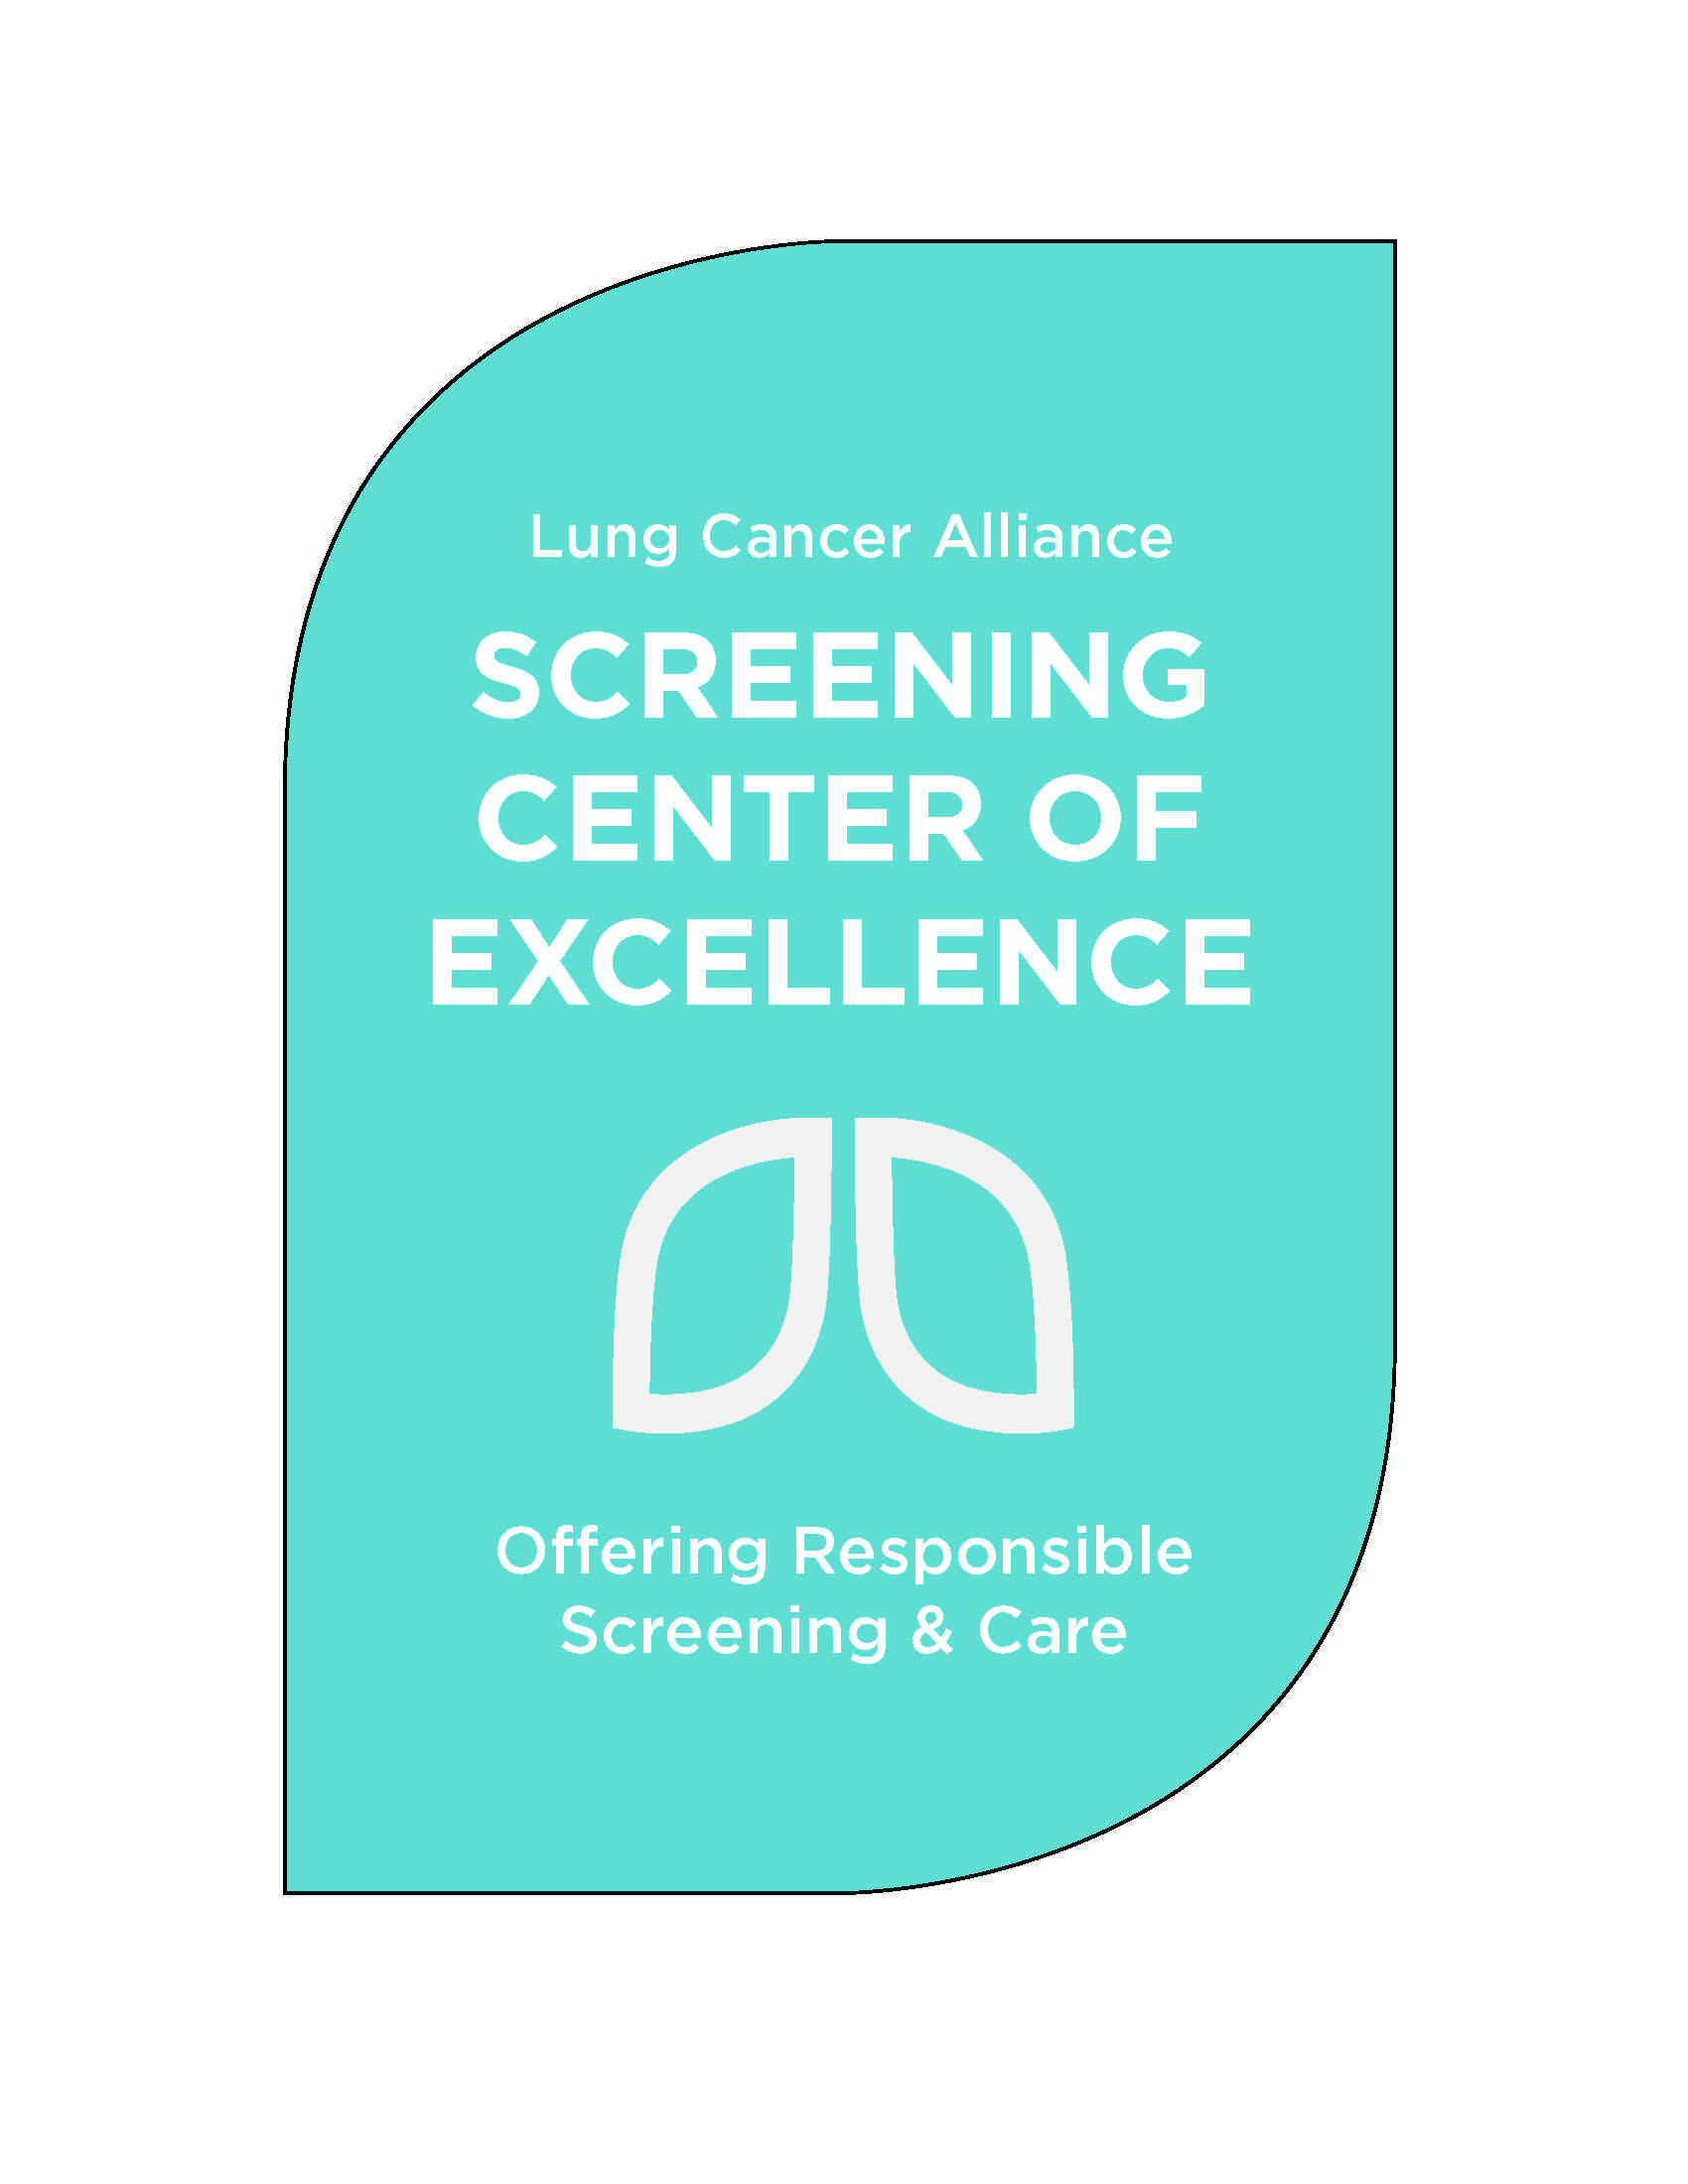 Screening Center of Excellence